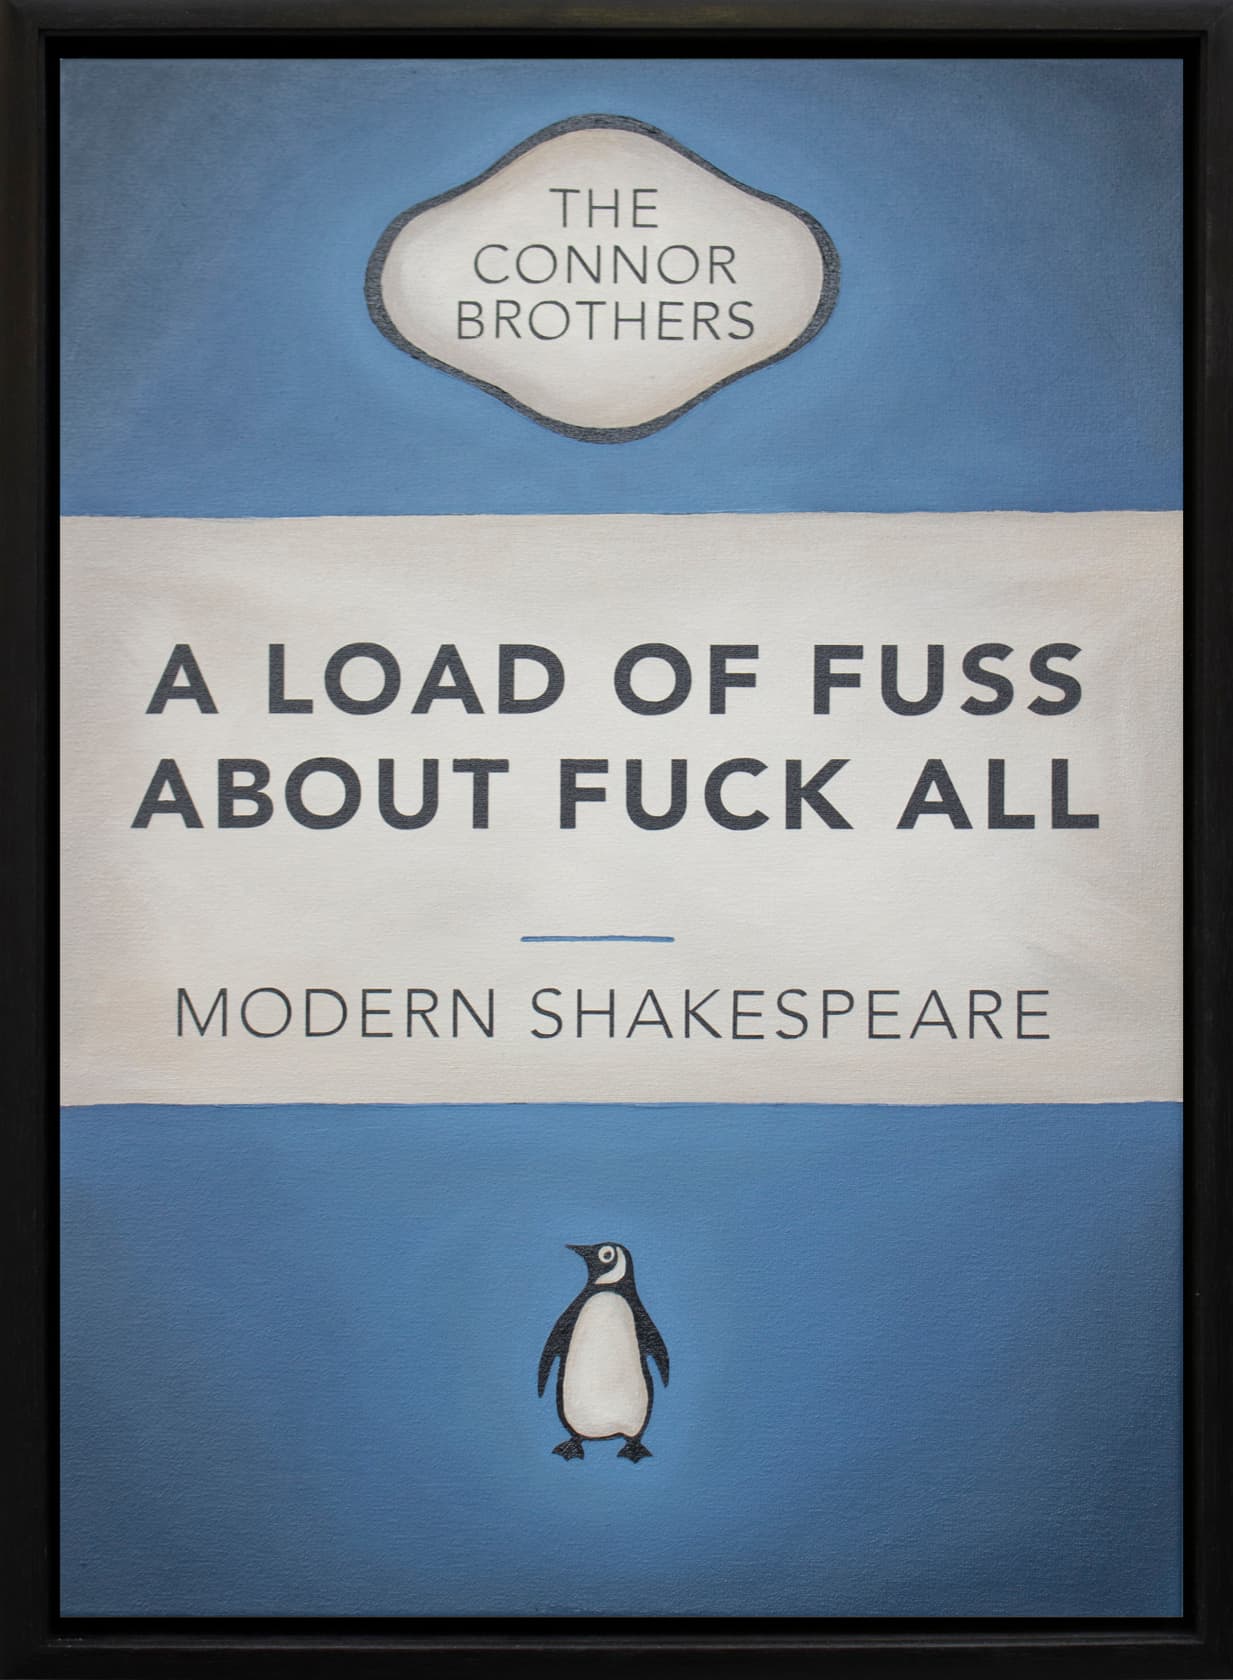 The Connor Brothers, A Load Of Fuss, 2019